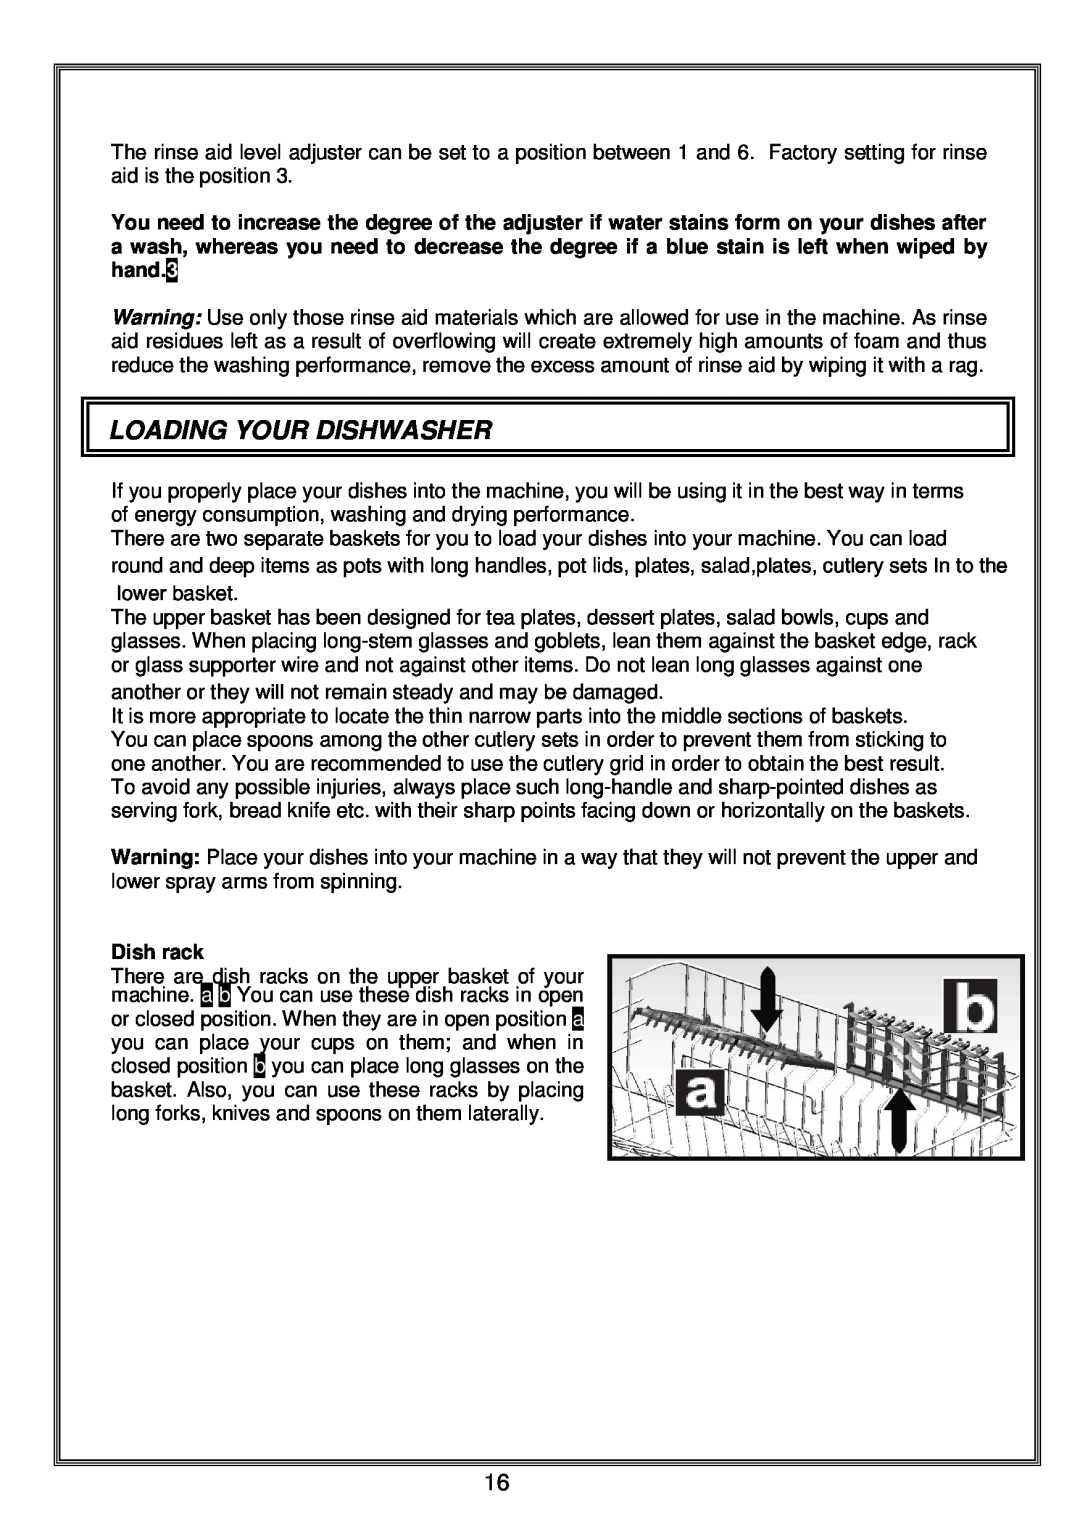 Russell Hobbs RHDW1 instruction manual Loading Your Dishwasher, Dish rack 